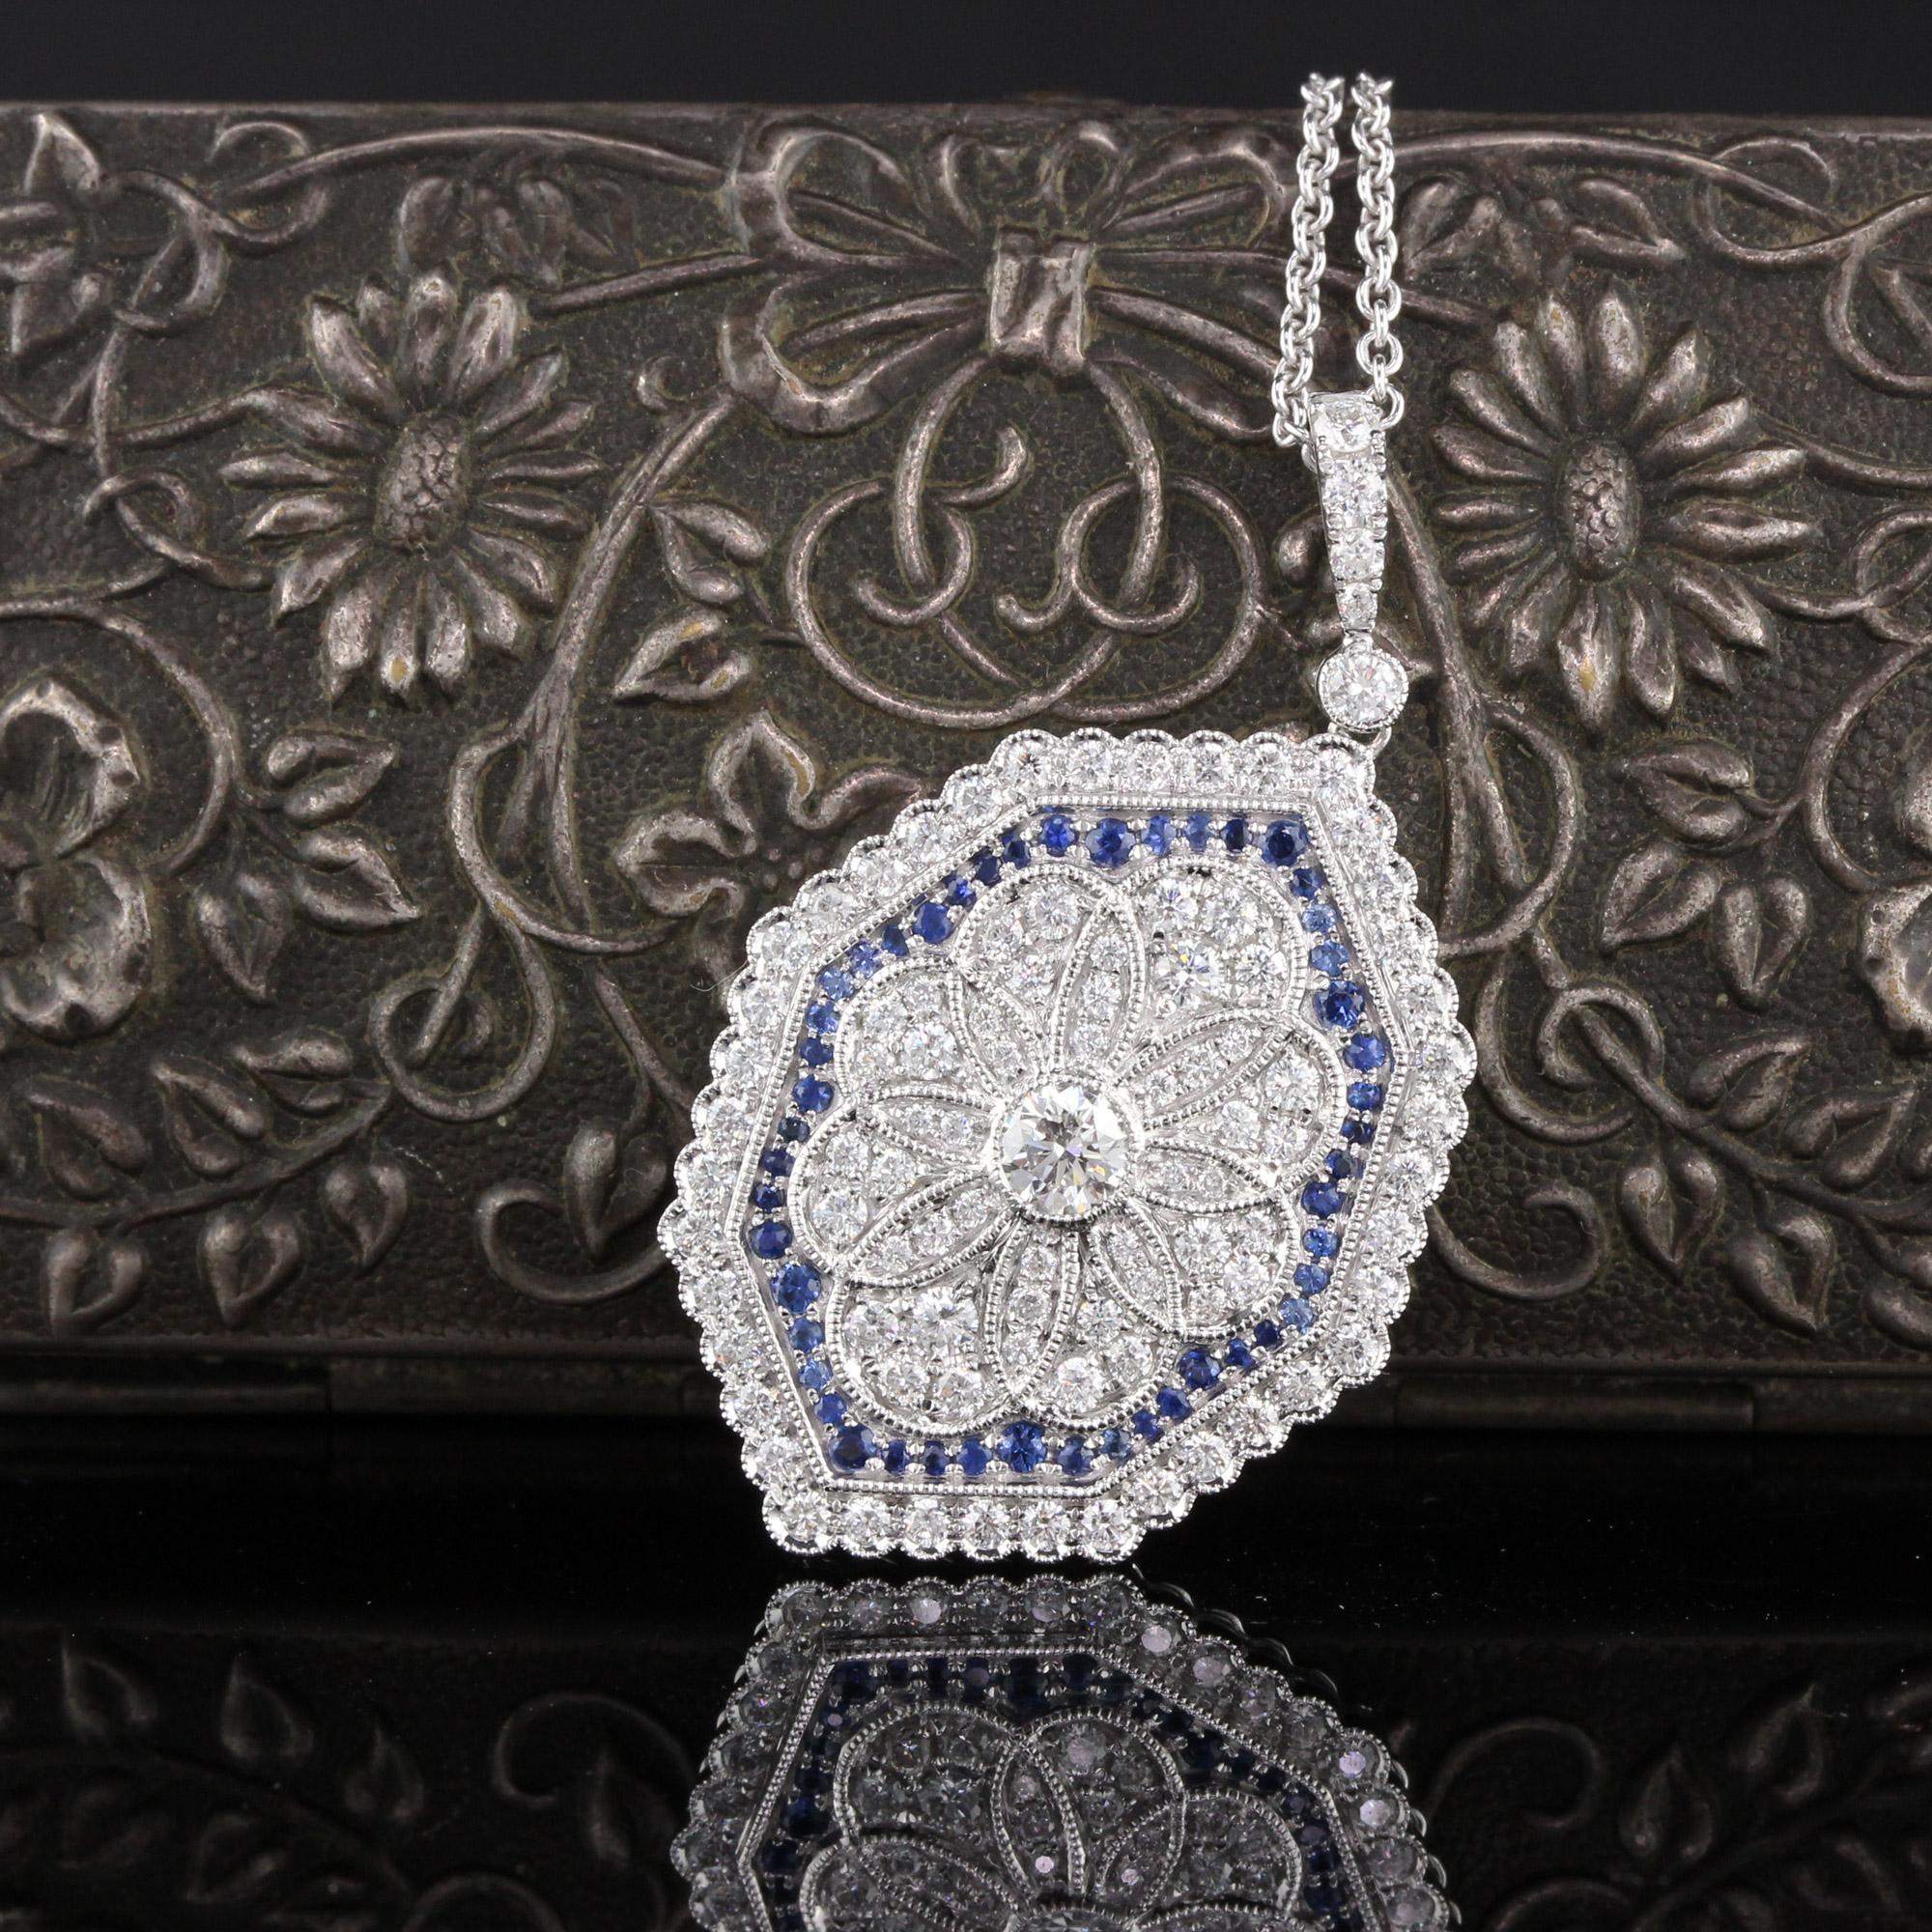 Gorgeous sapphire and diamond pendant with dazzling diamond center.

Metal: 18K White Gold

Weight: 8.1 Grams

Diamond Weight: Approximately 1.20 ct.

Diamond Color: G

Diamond Clarity: VS2

Gemstone Weight: Approximately 0.50 ct.